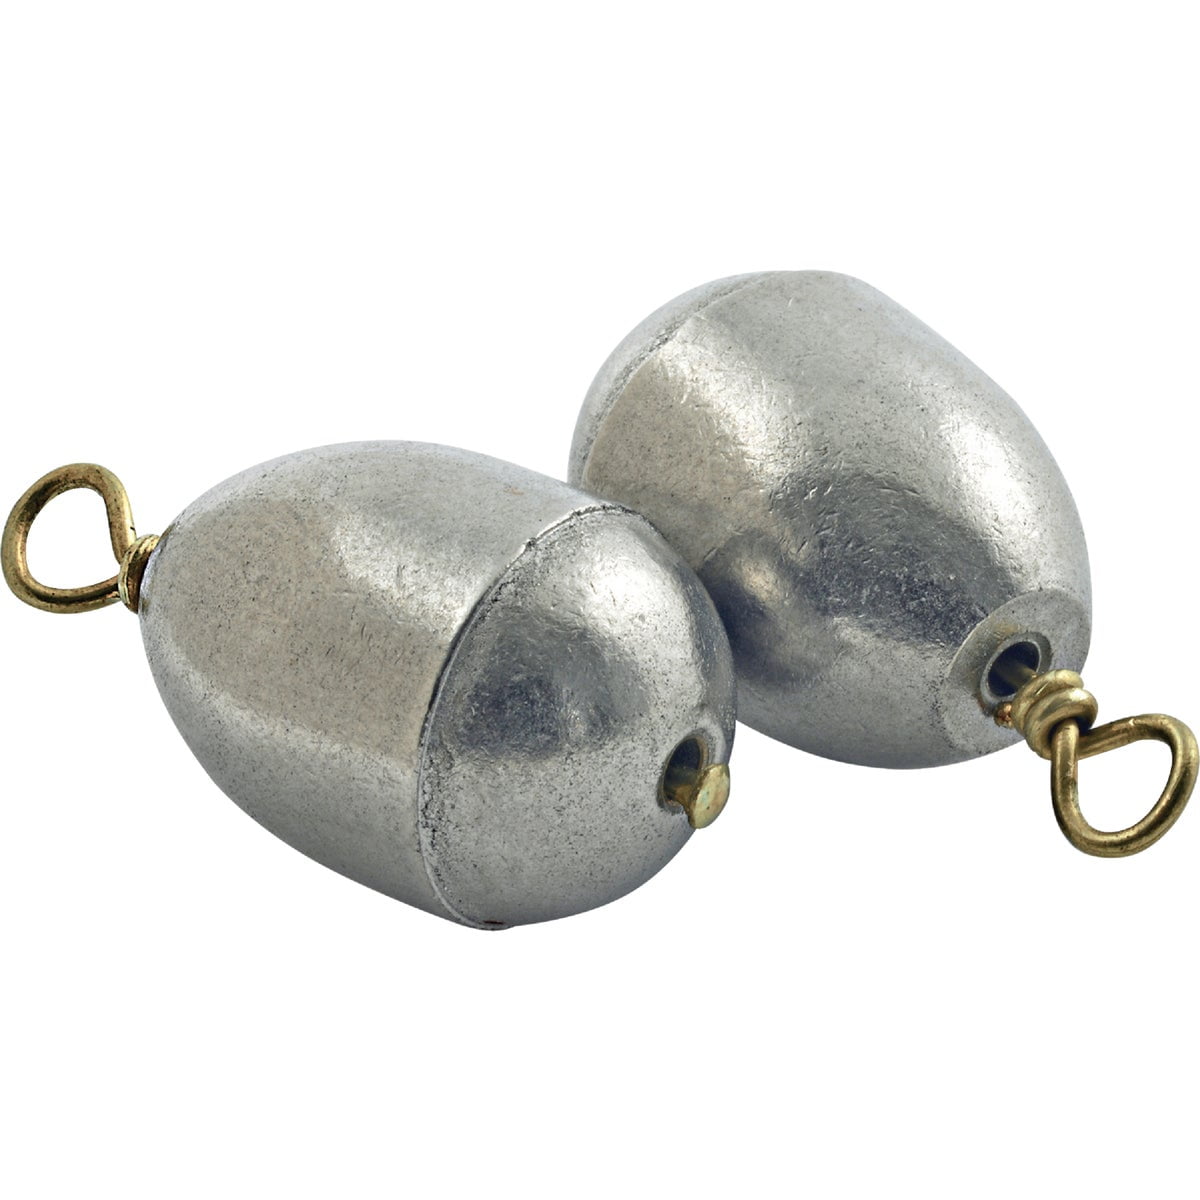 Uxcell 3/32oz Tungsten Fishing Weights Bait Sinkers for Bass Fishing, Green  3 Pack 